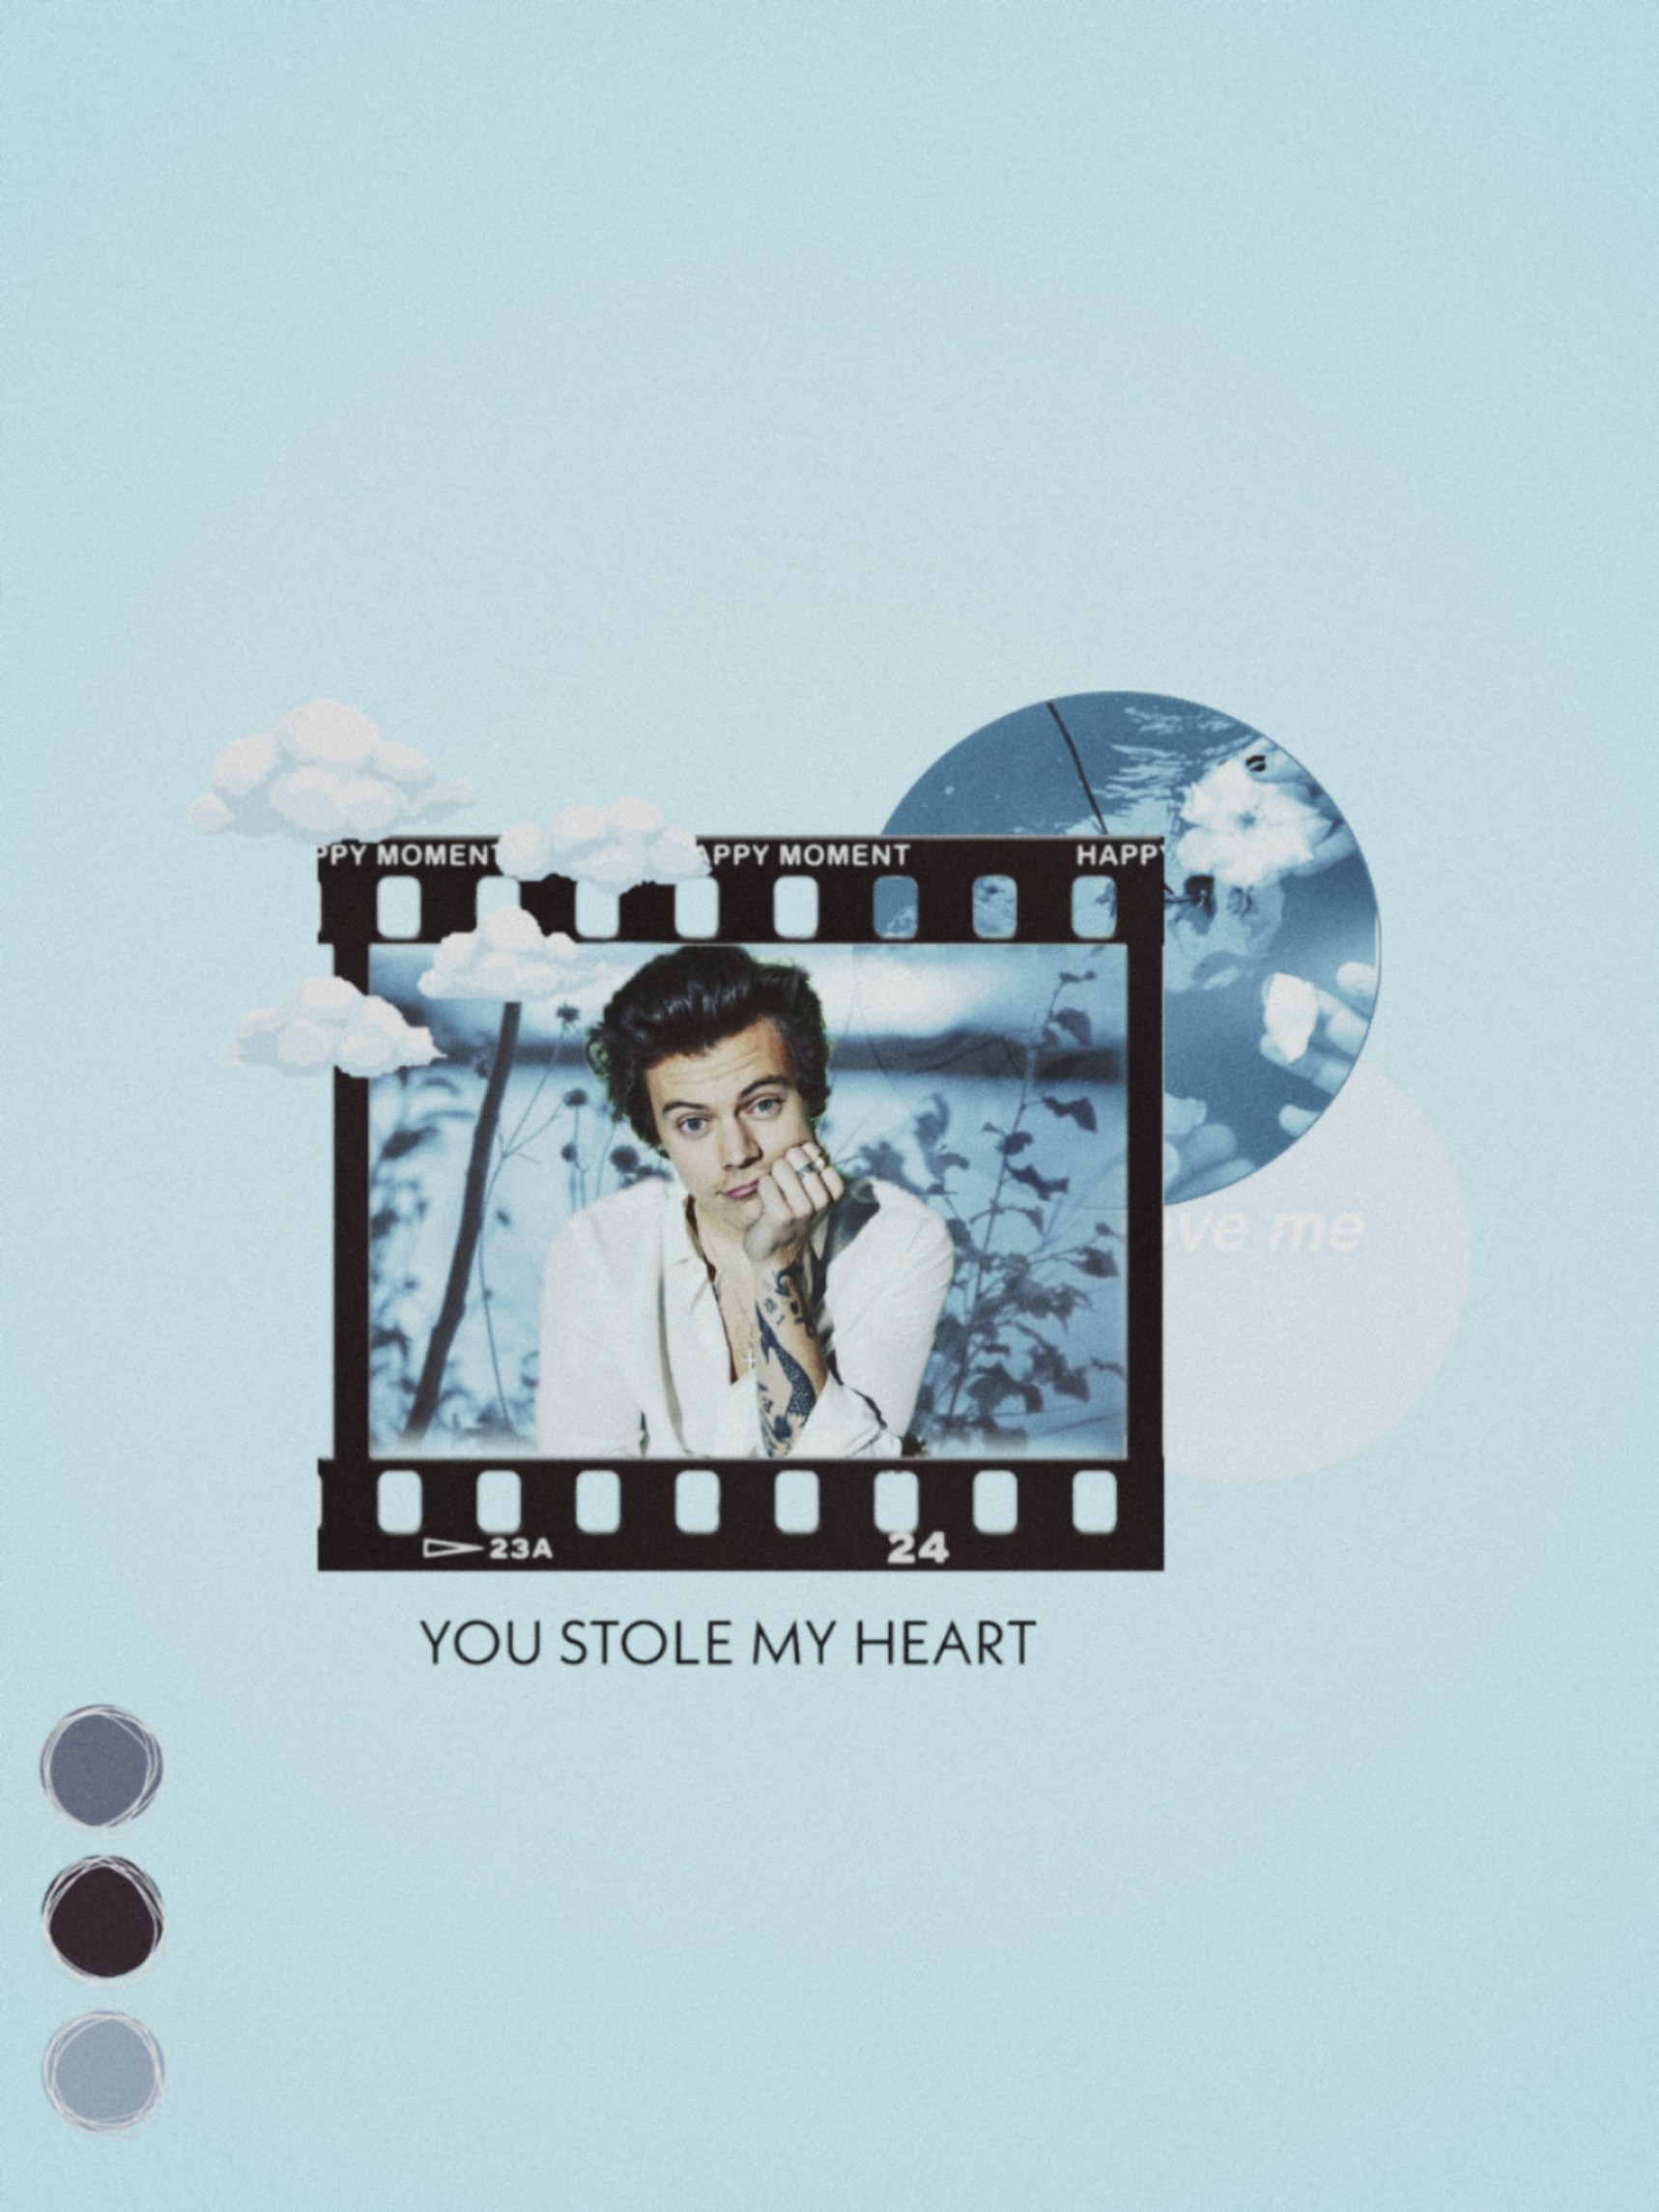 💎harry Styles Wallpaper💎
who Should I Do Next - Poster , HD Wallpaper & Backgrounds